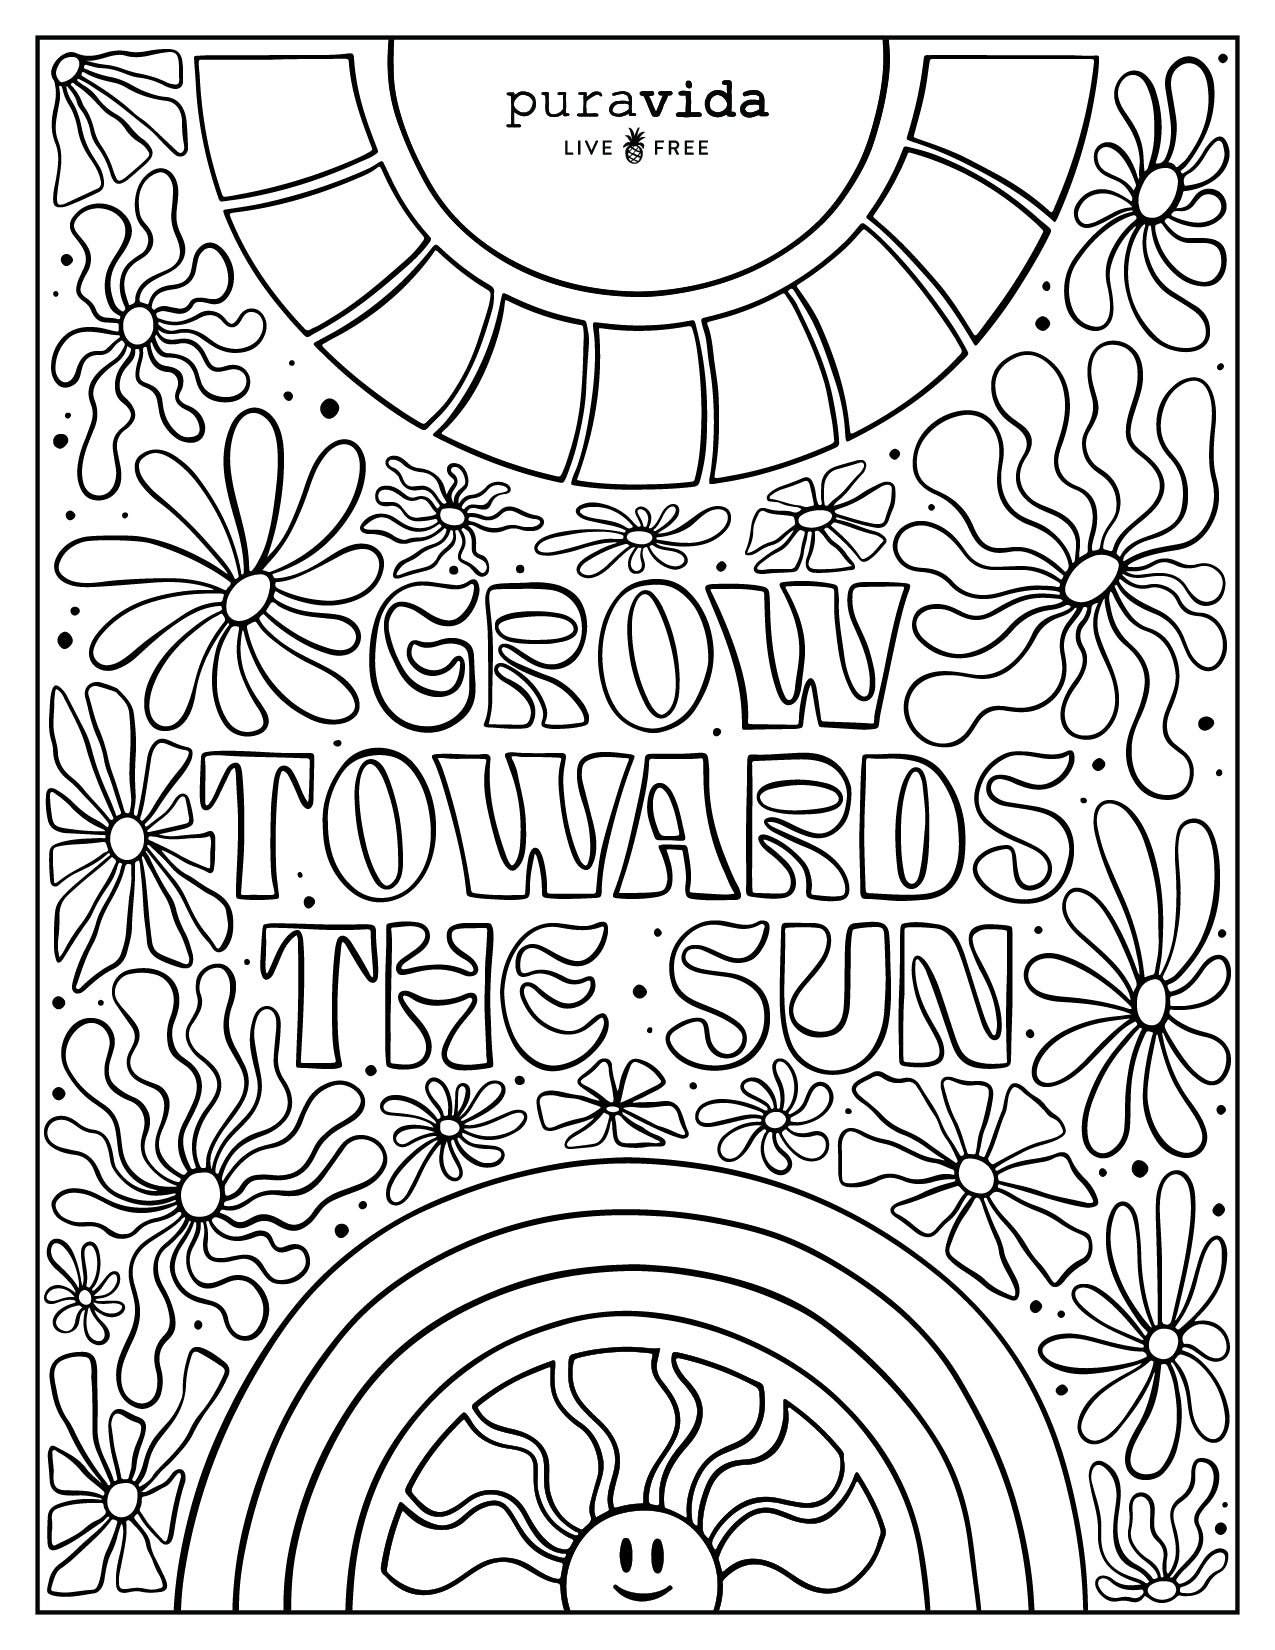 PV Birthday Coloring Sheets - Grow Towards the Sun